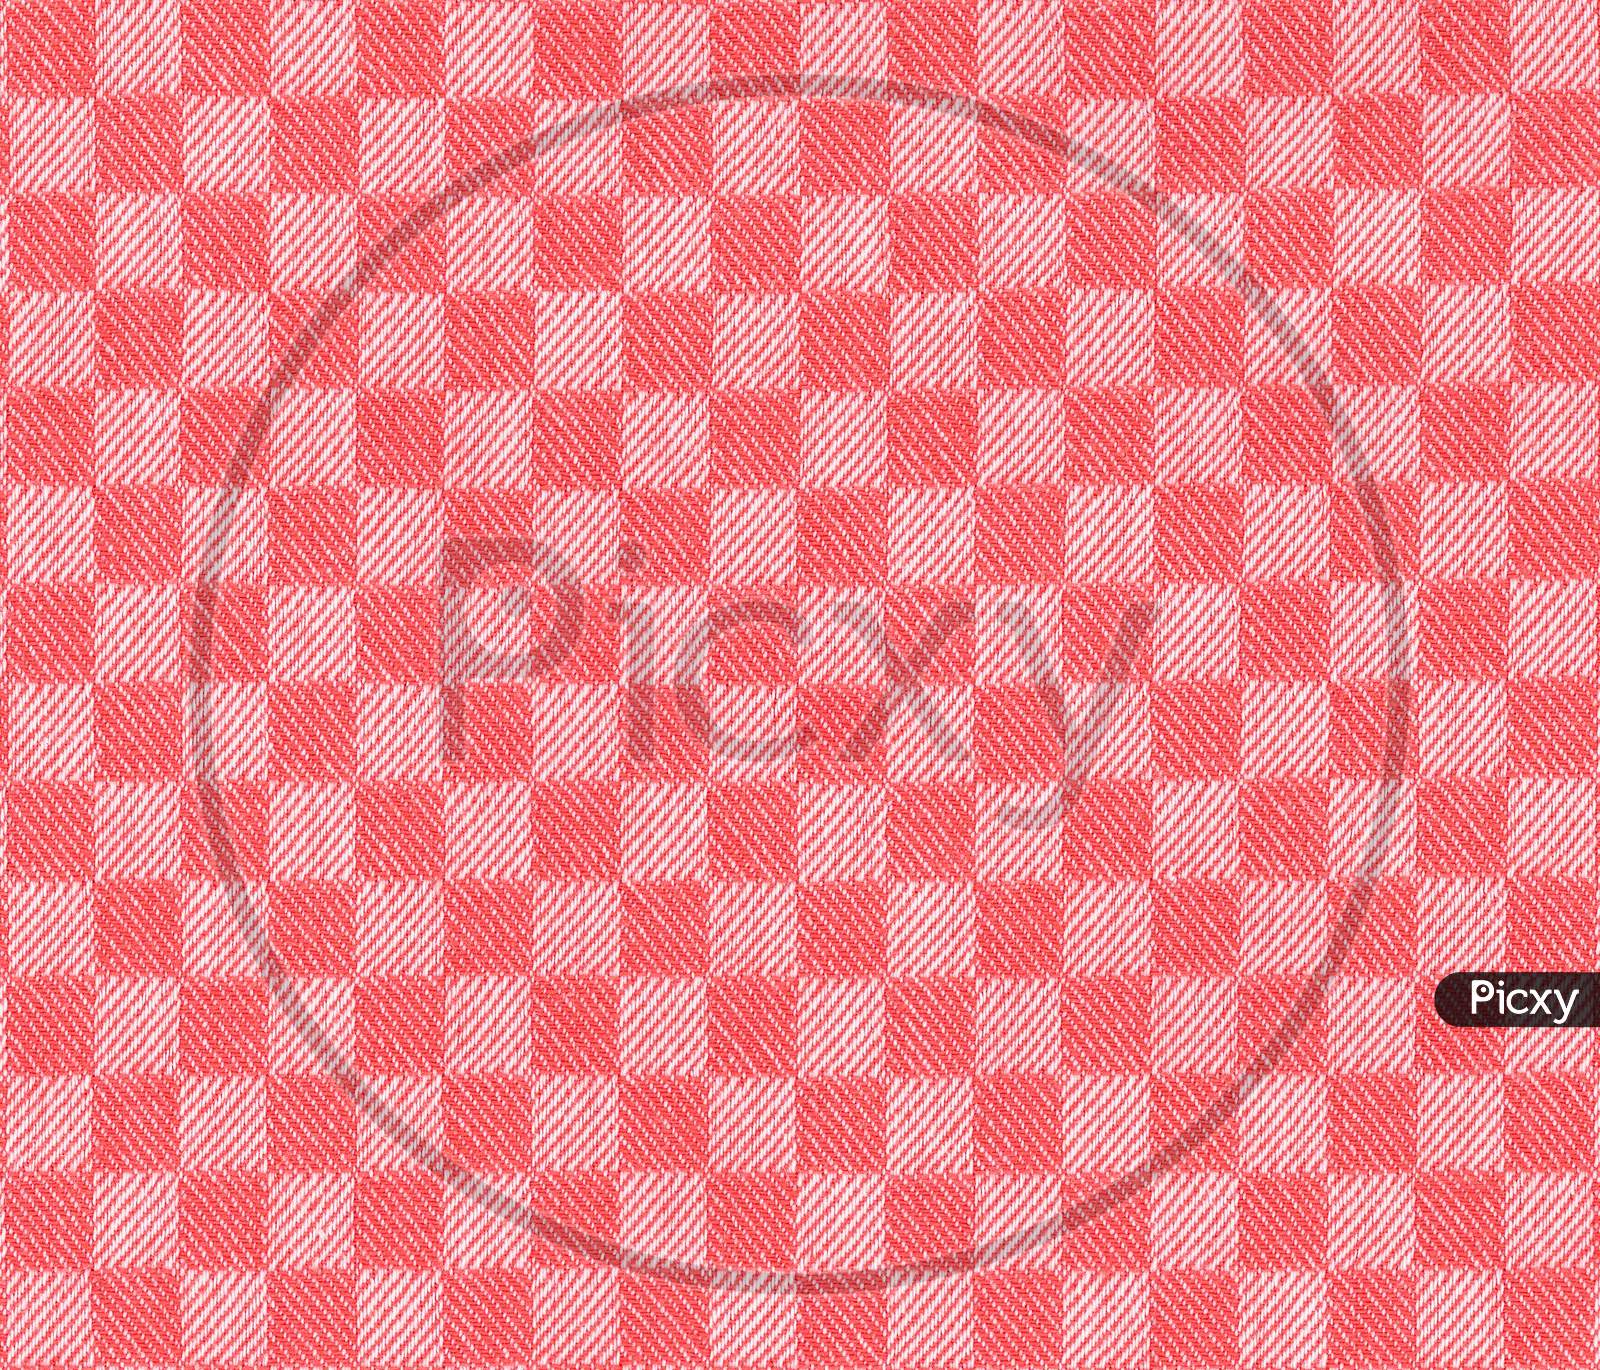 Chequered Red And White Fabric Texture Background